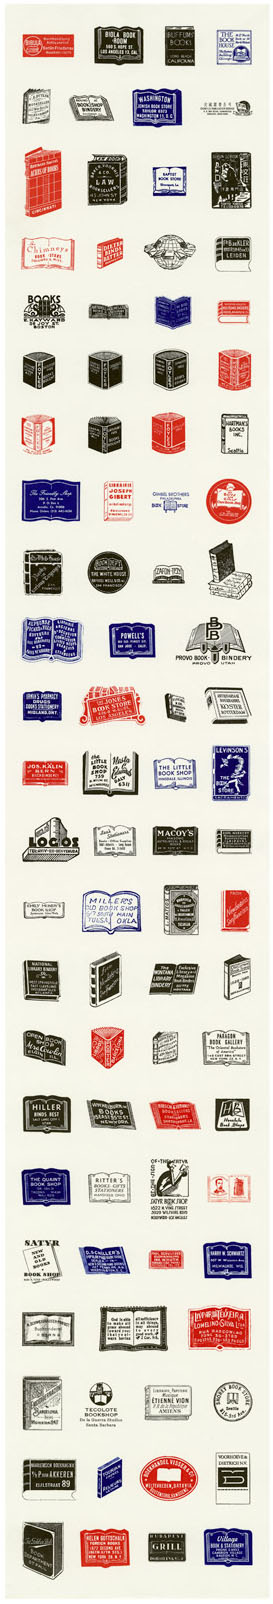 Book trade labels from around the world